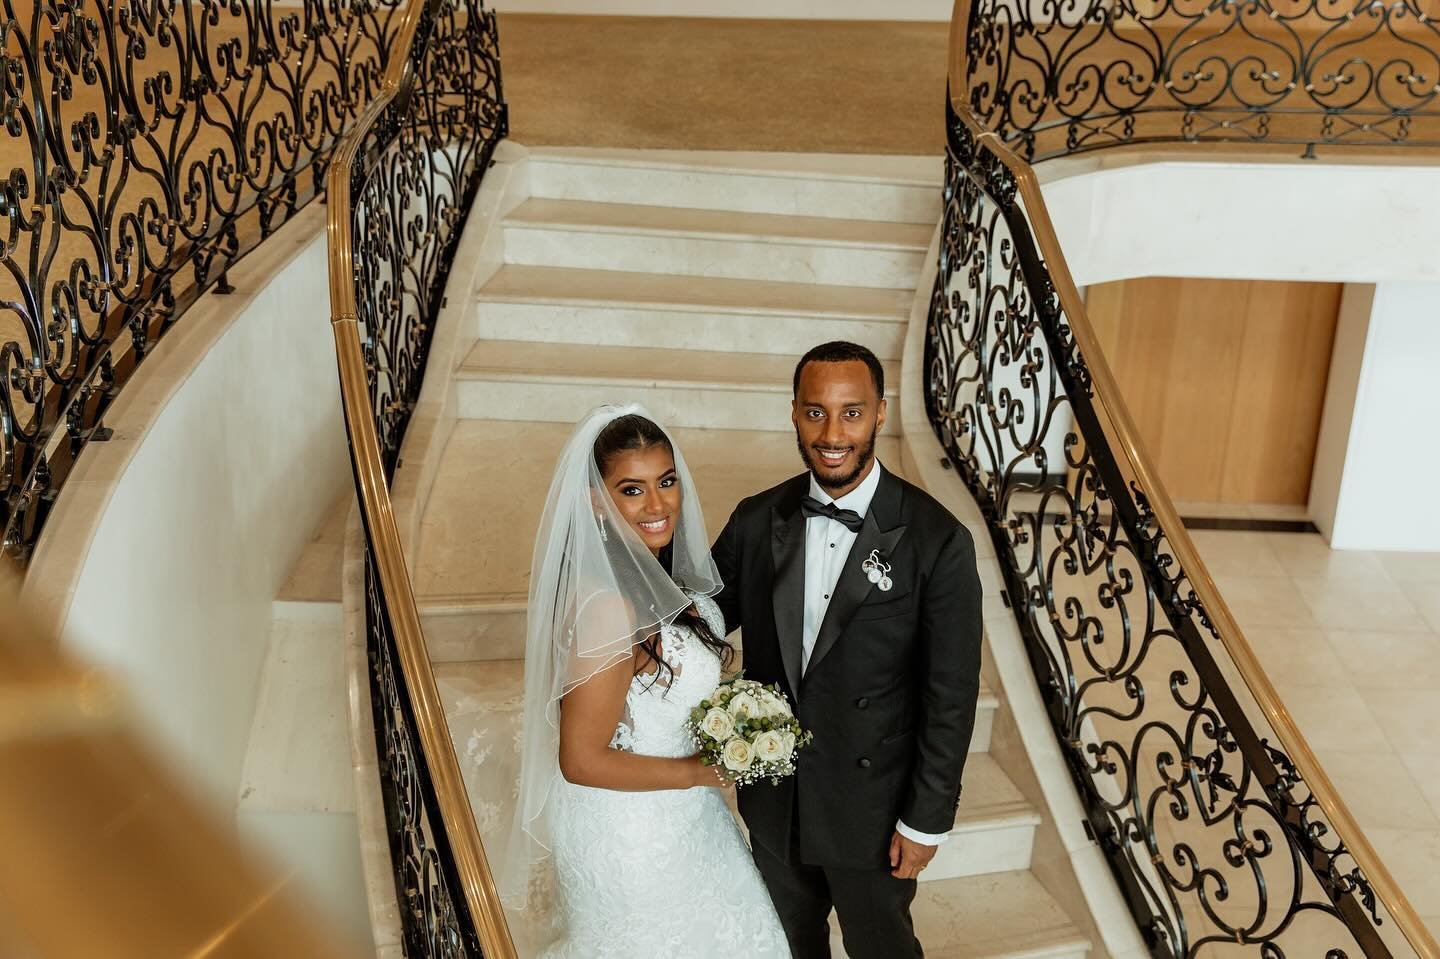 ✨ Having your wedding photos @meridian_grand will not disappoint, this beautiful staircase is great for a couples shoot and group photos 💖

#kiiroandkiwi #meridiangrand #LondonLoveStory #CityCharmWeddings #LondonSayingIDo #UrbanRomance #LondonWeddin